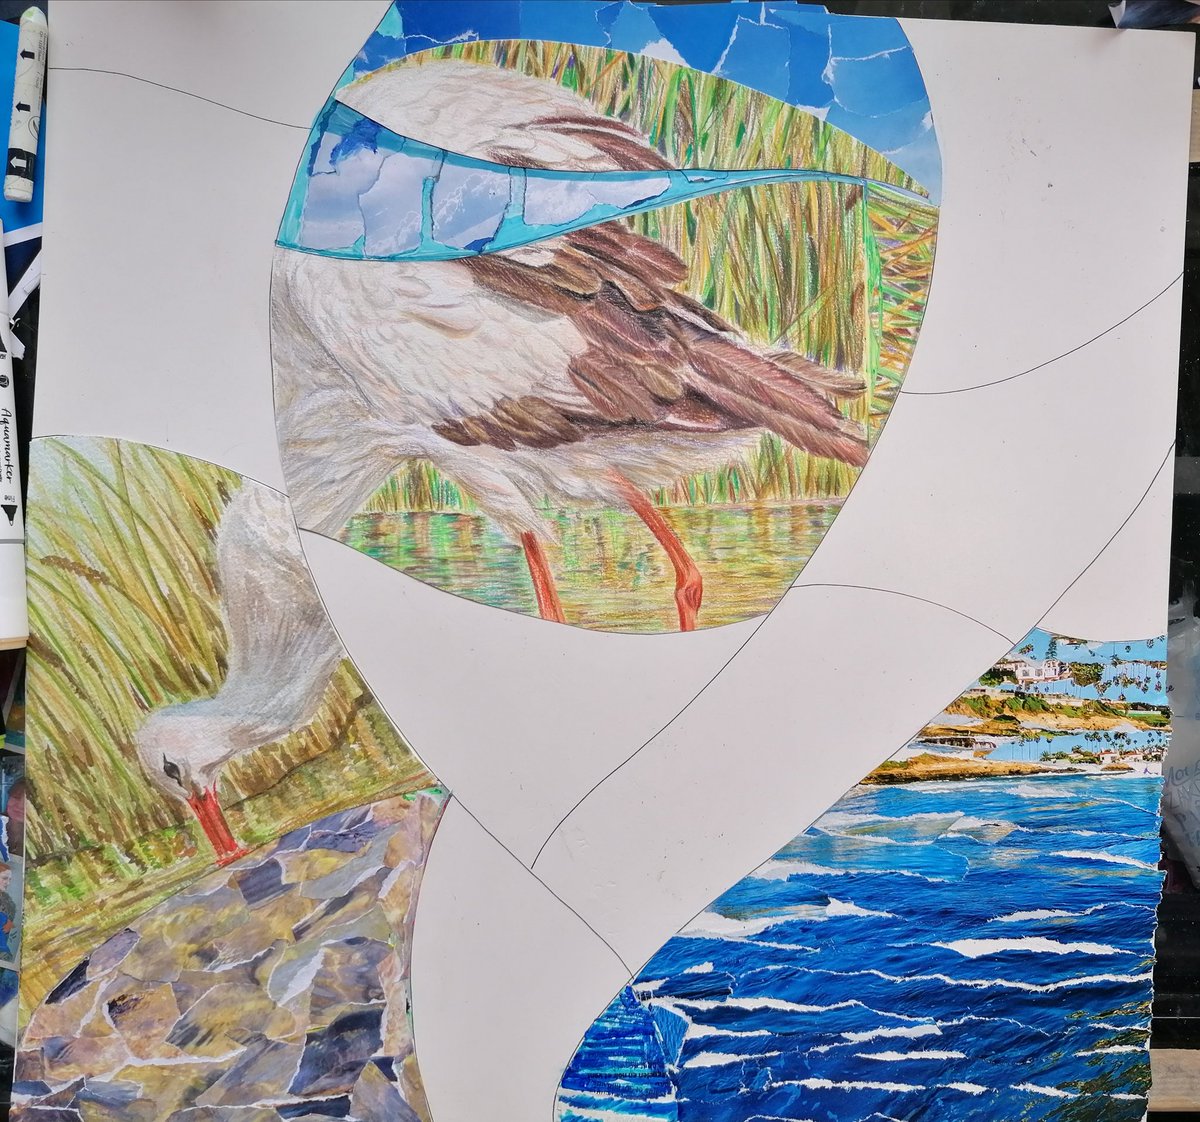 Today I progress on my final cubisme artwork
Stork at lake
I combinate my colorspencils and watercolors stork in this artwork
As soon on @OmniFlixNetwork
@chroniclesvault
@Sandytoes2211
#nftfarnazpishro
Check out my artwork in my site
farnazcollections.com